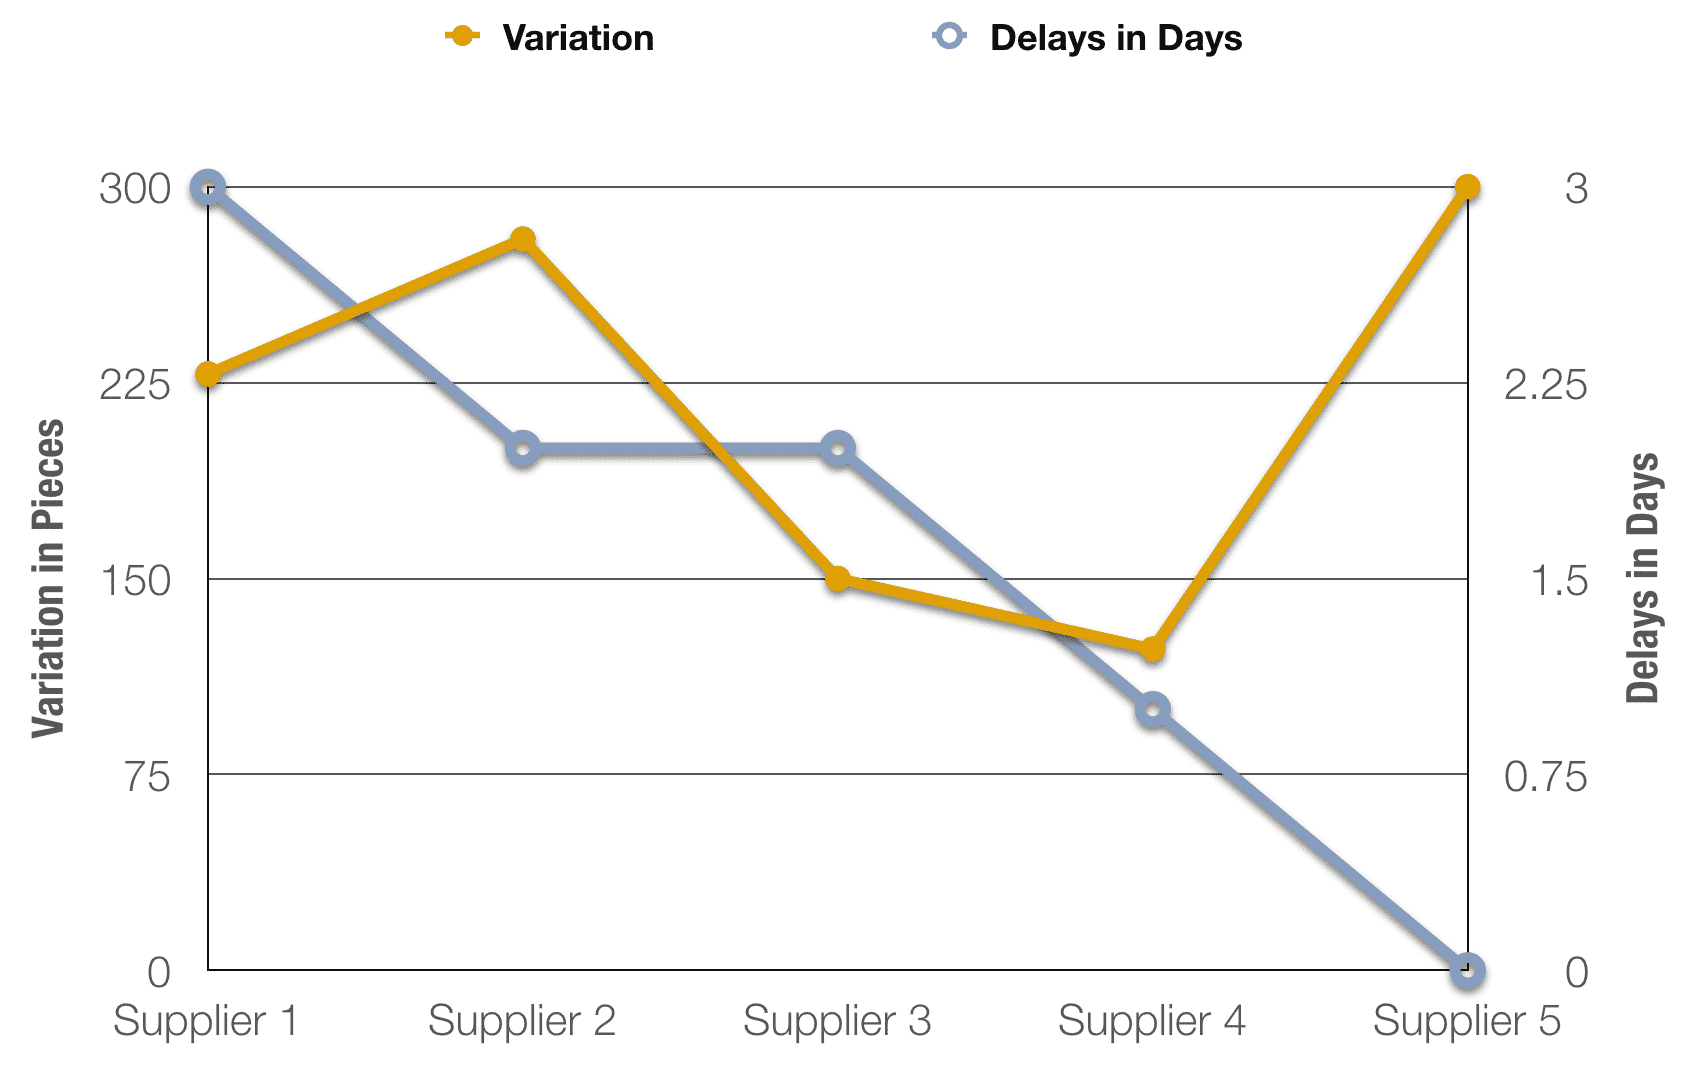 Average Supplier's Variation and Delays